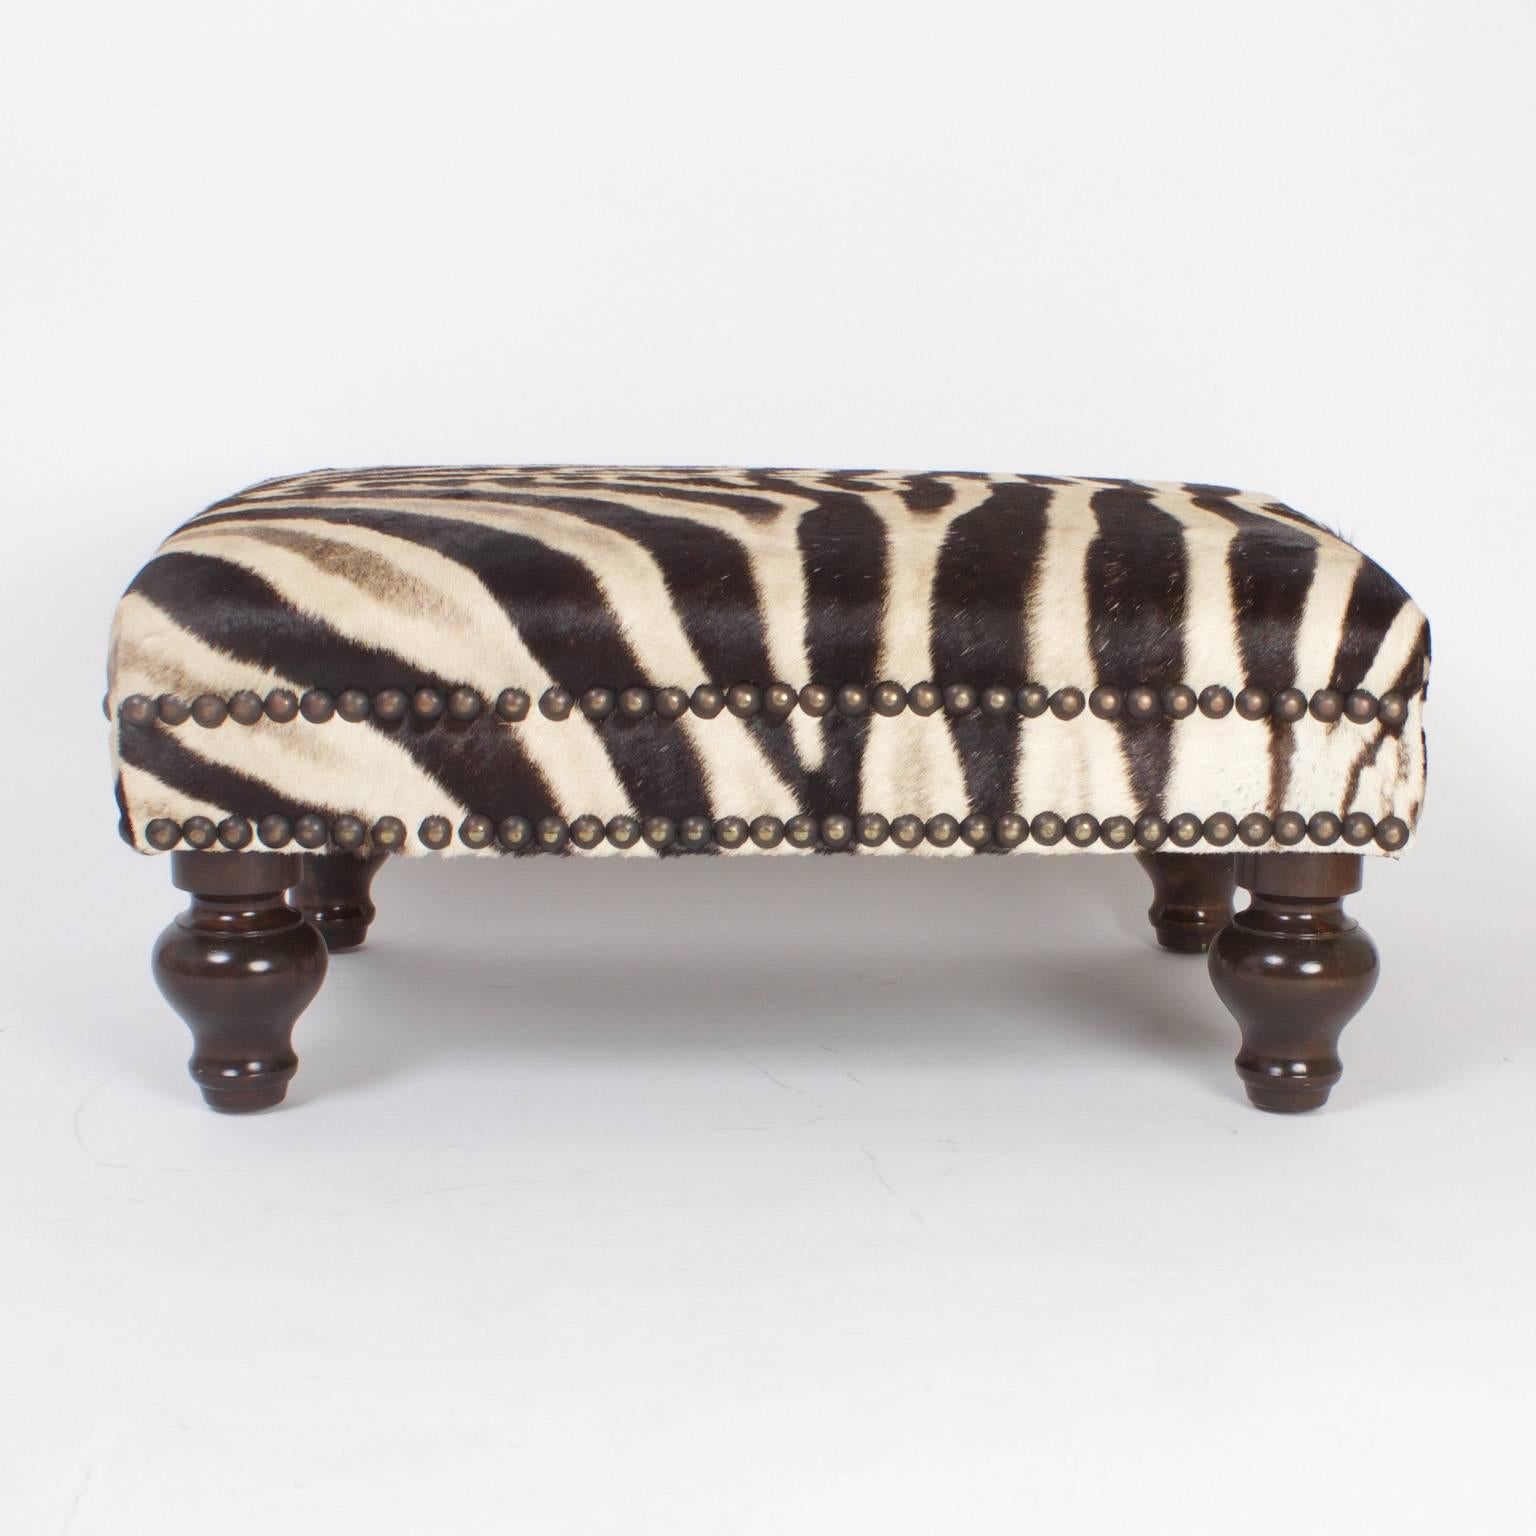 Handsome rectangular bench or ottoman upholstered in natural organic zebra hyde, decorated with brass studs and supported by Classic turned wood feet.